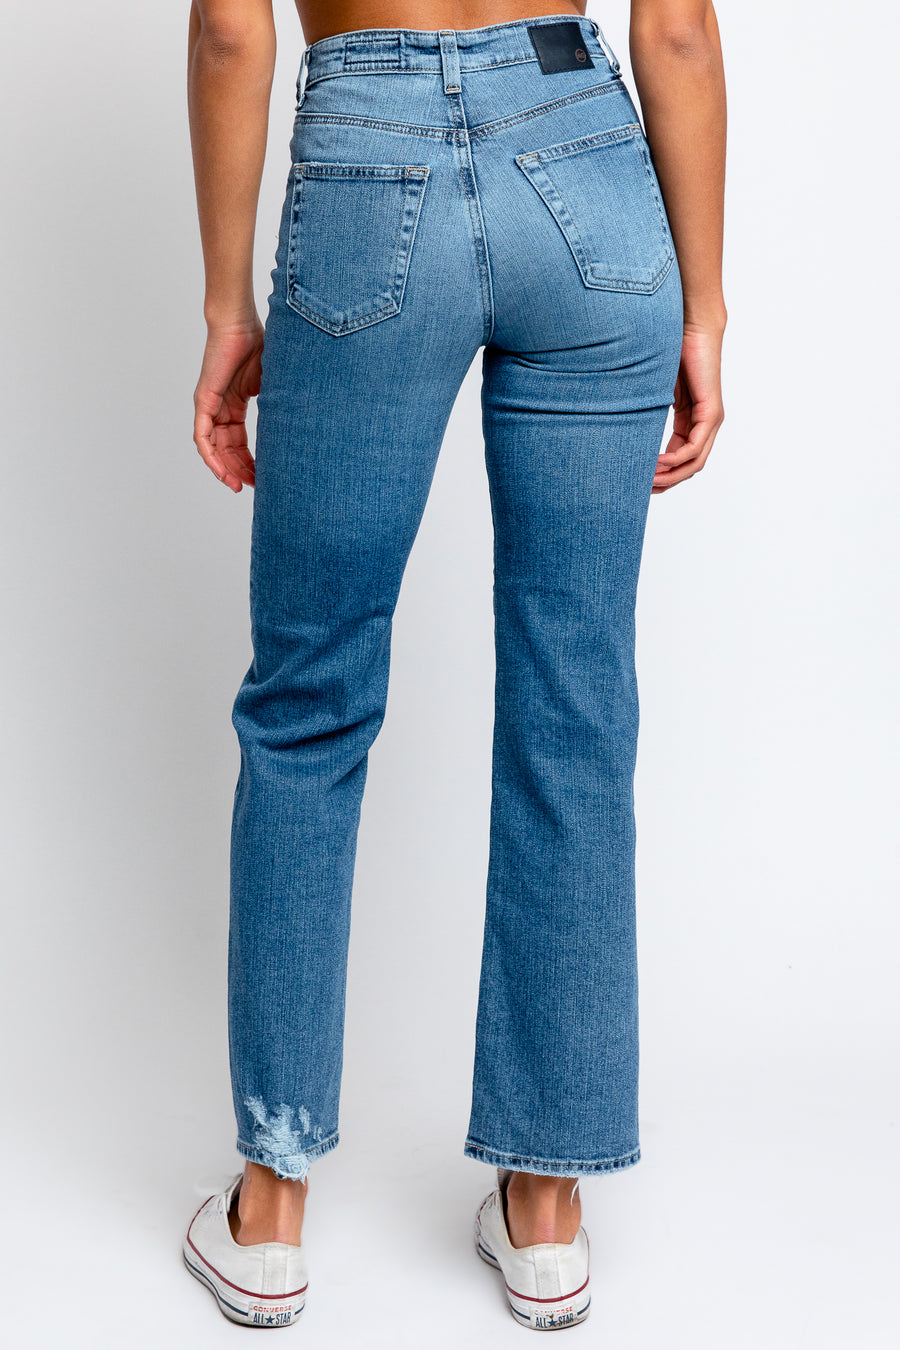 AG Jeans Alexxis Vintage Straight in True Intention